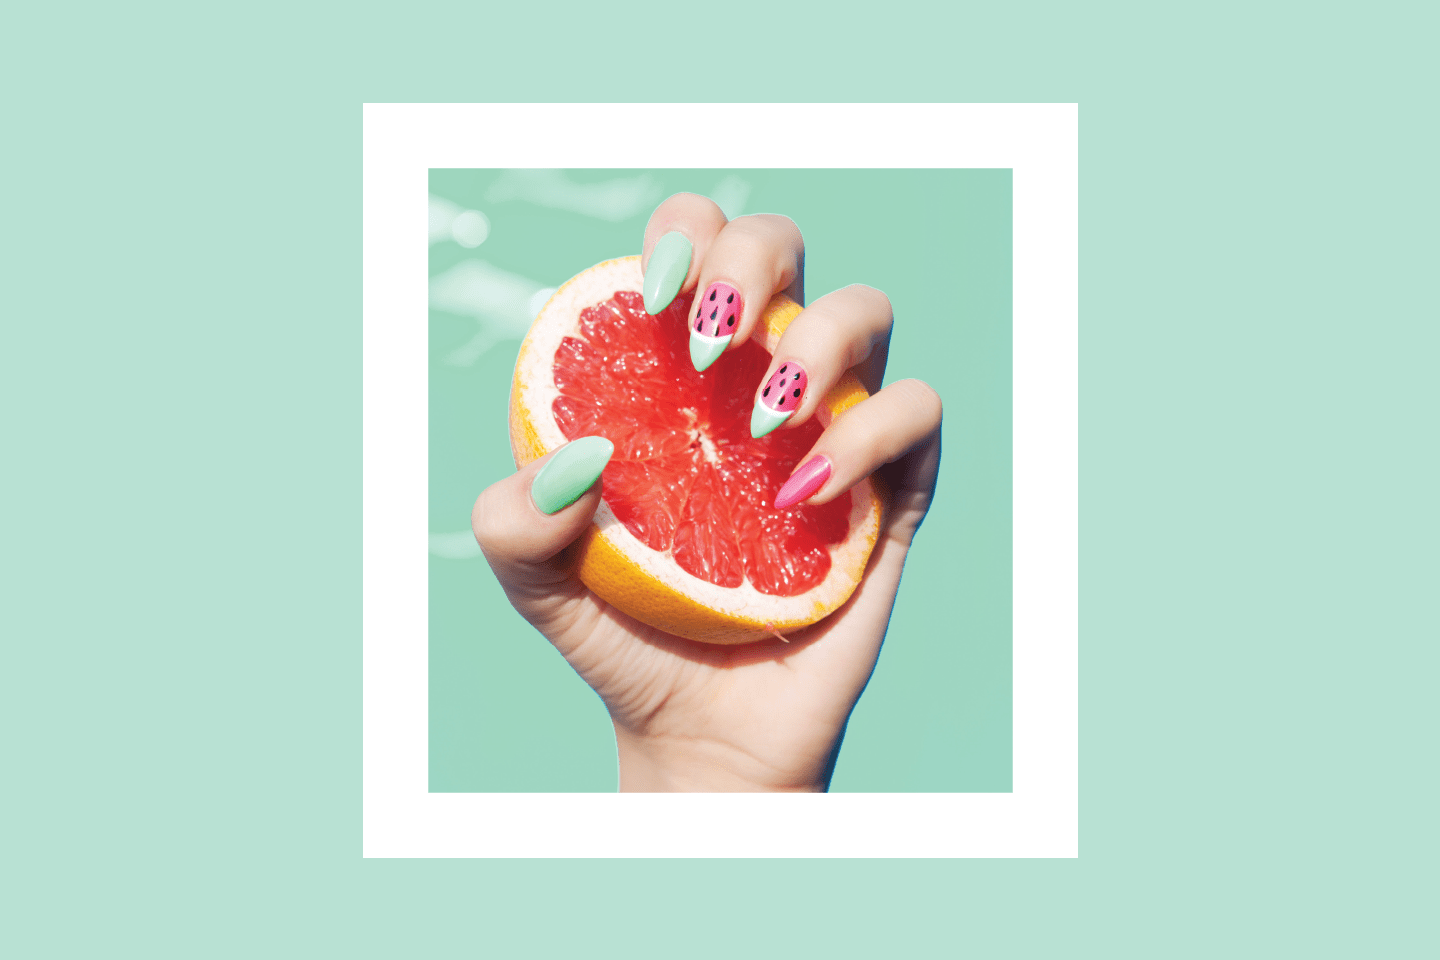 Hand with watermelon nail polish clutching a pink grapefruit in chattanooga